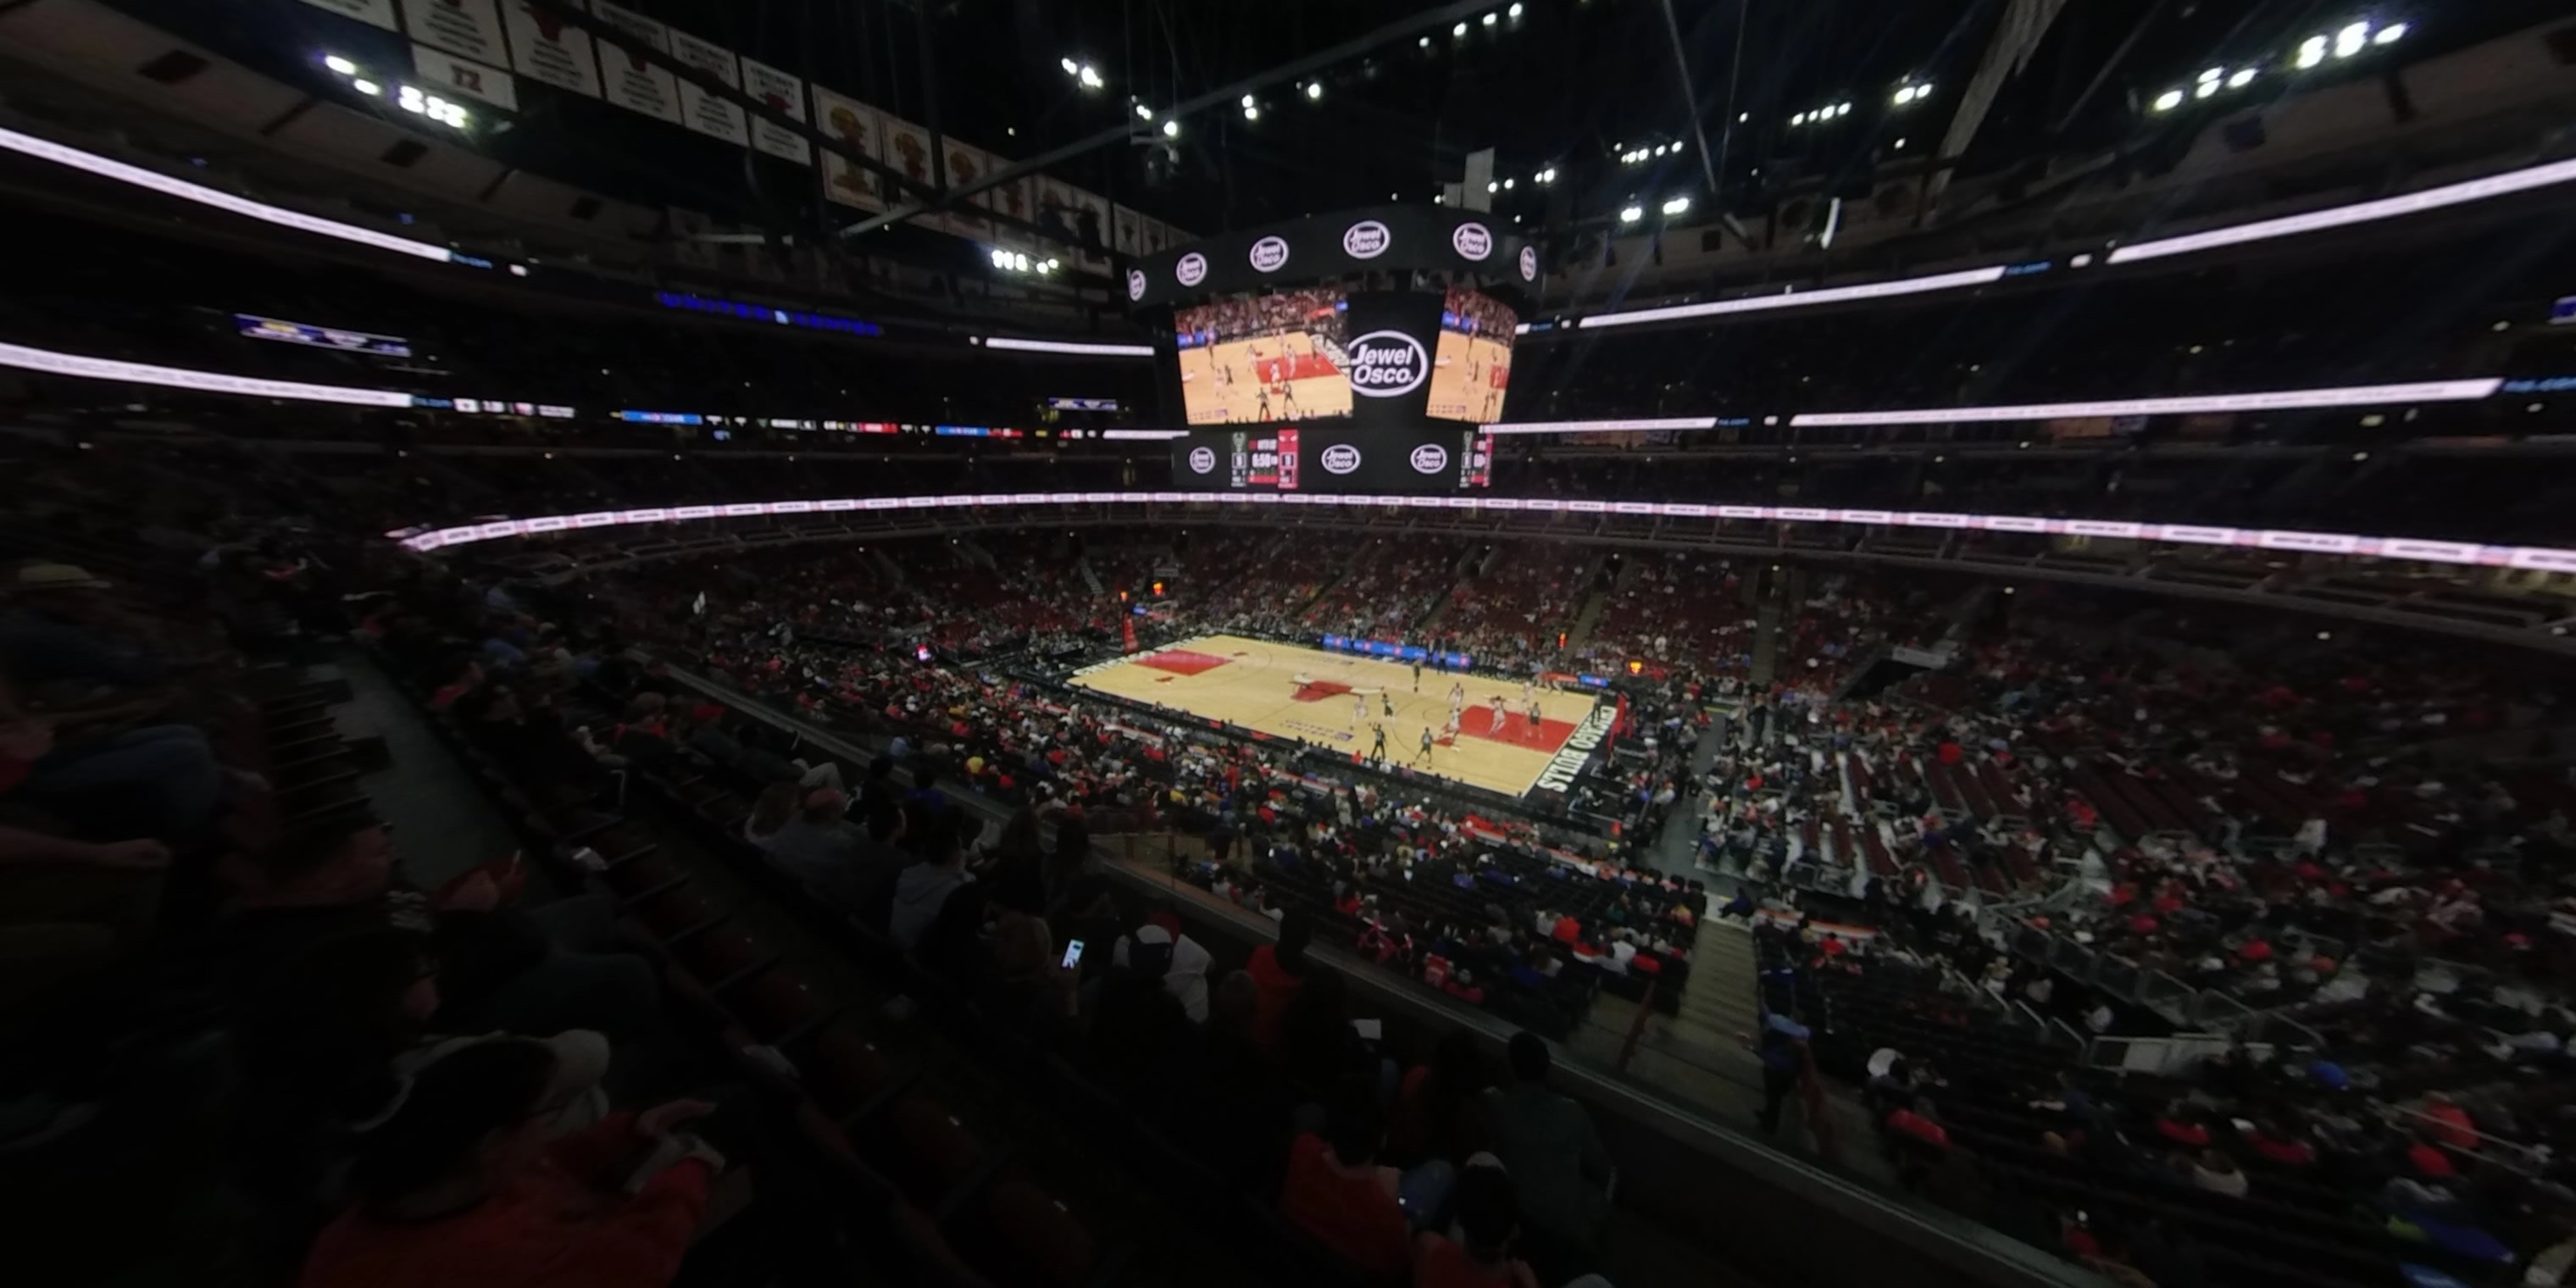 section 215 panoramic seat view  for basketball - united center